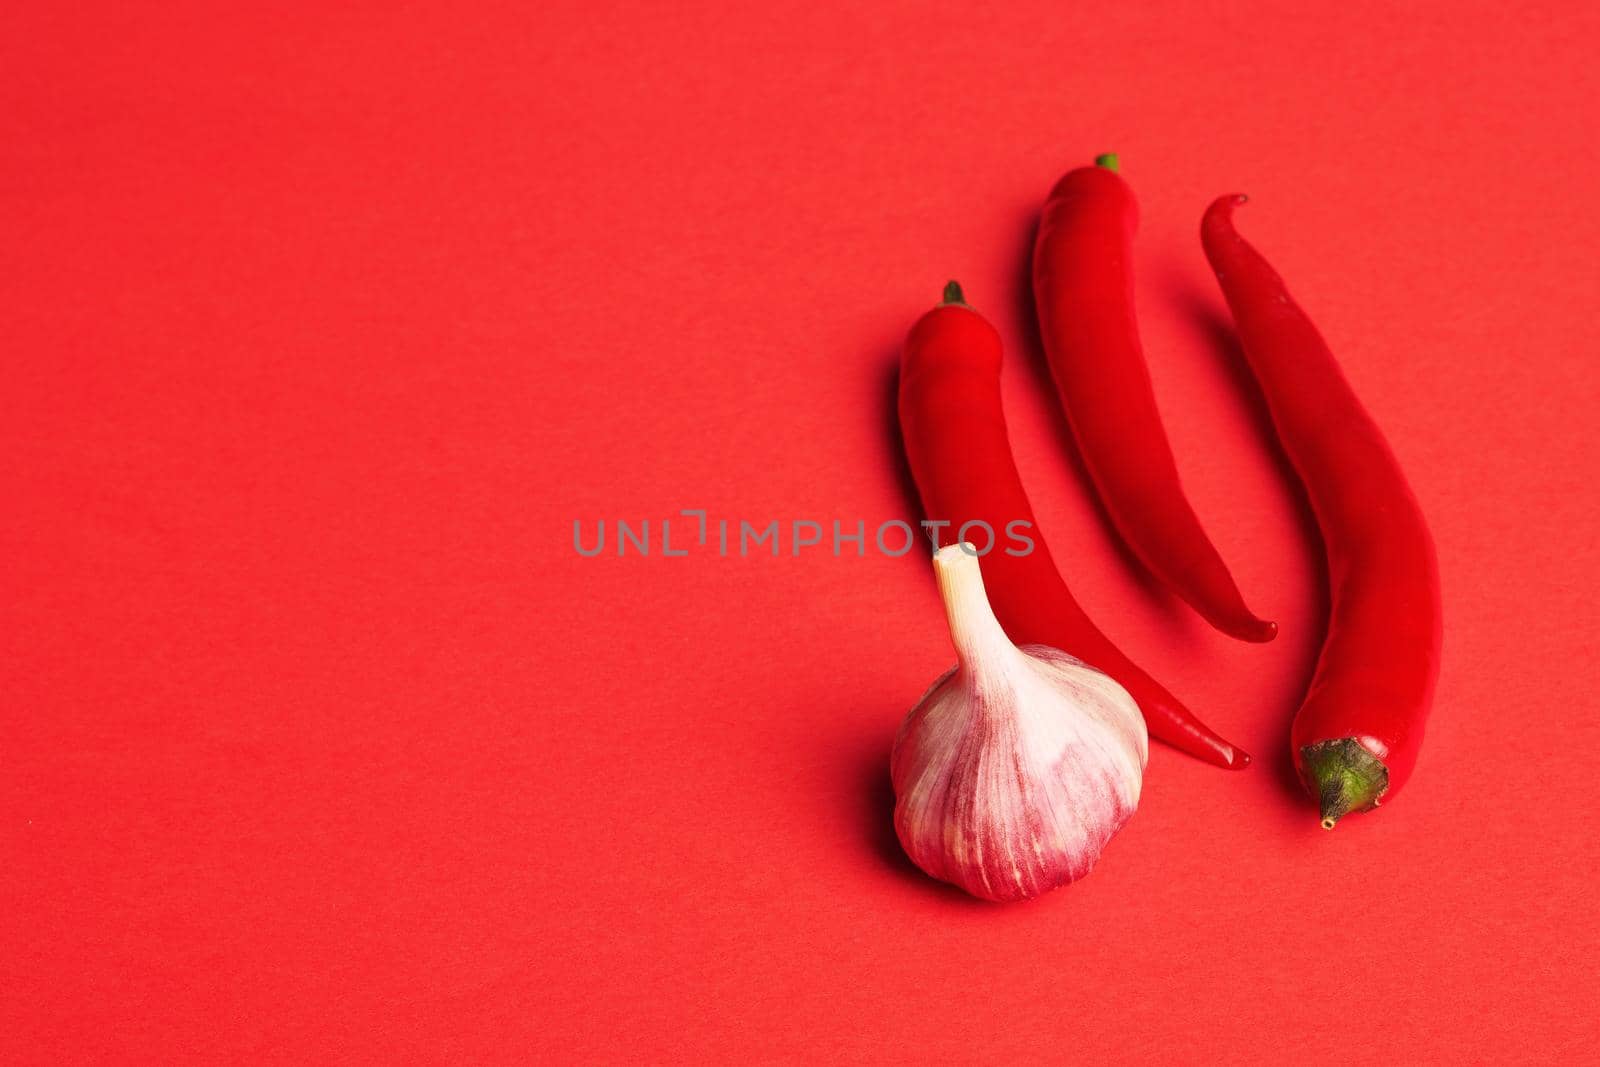 Red pepper and garlic. Food, ripe vegetables and spices, close-up, isolated, red background, with a place to label. High quality photo